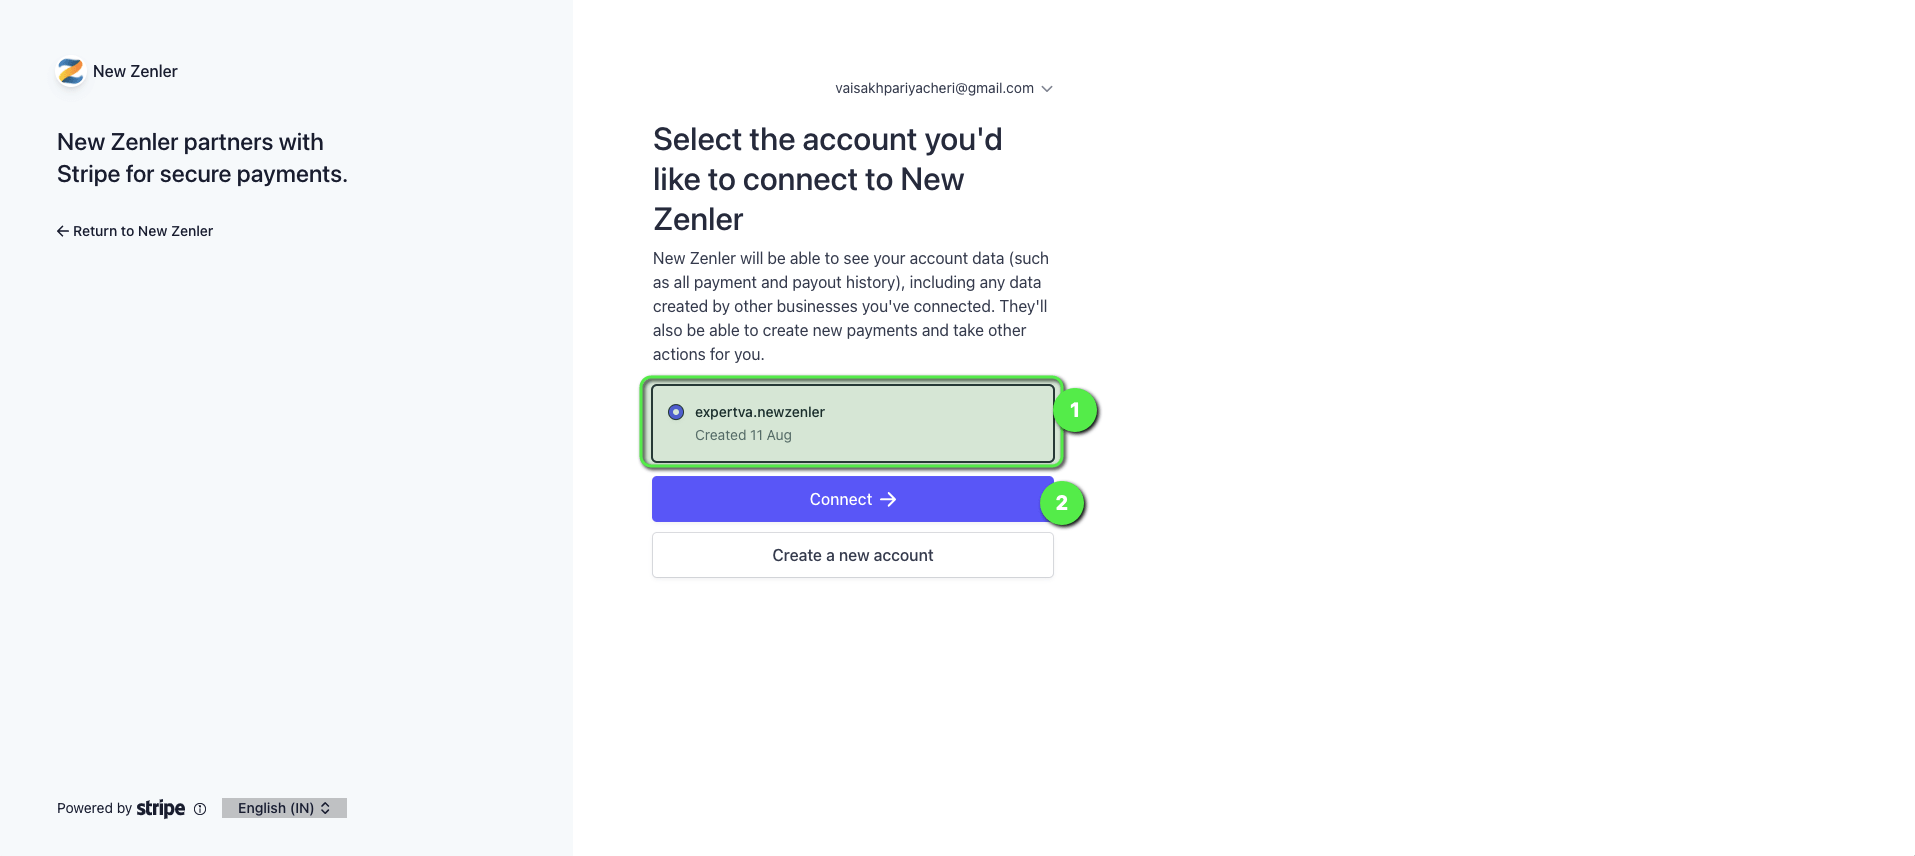 Once you log in, Stripe will show you all the active stripe accounts, you can select the one which you want to use with New Zenler and click on "Connect"